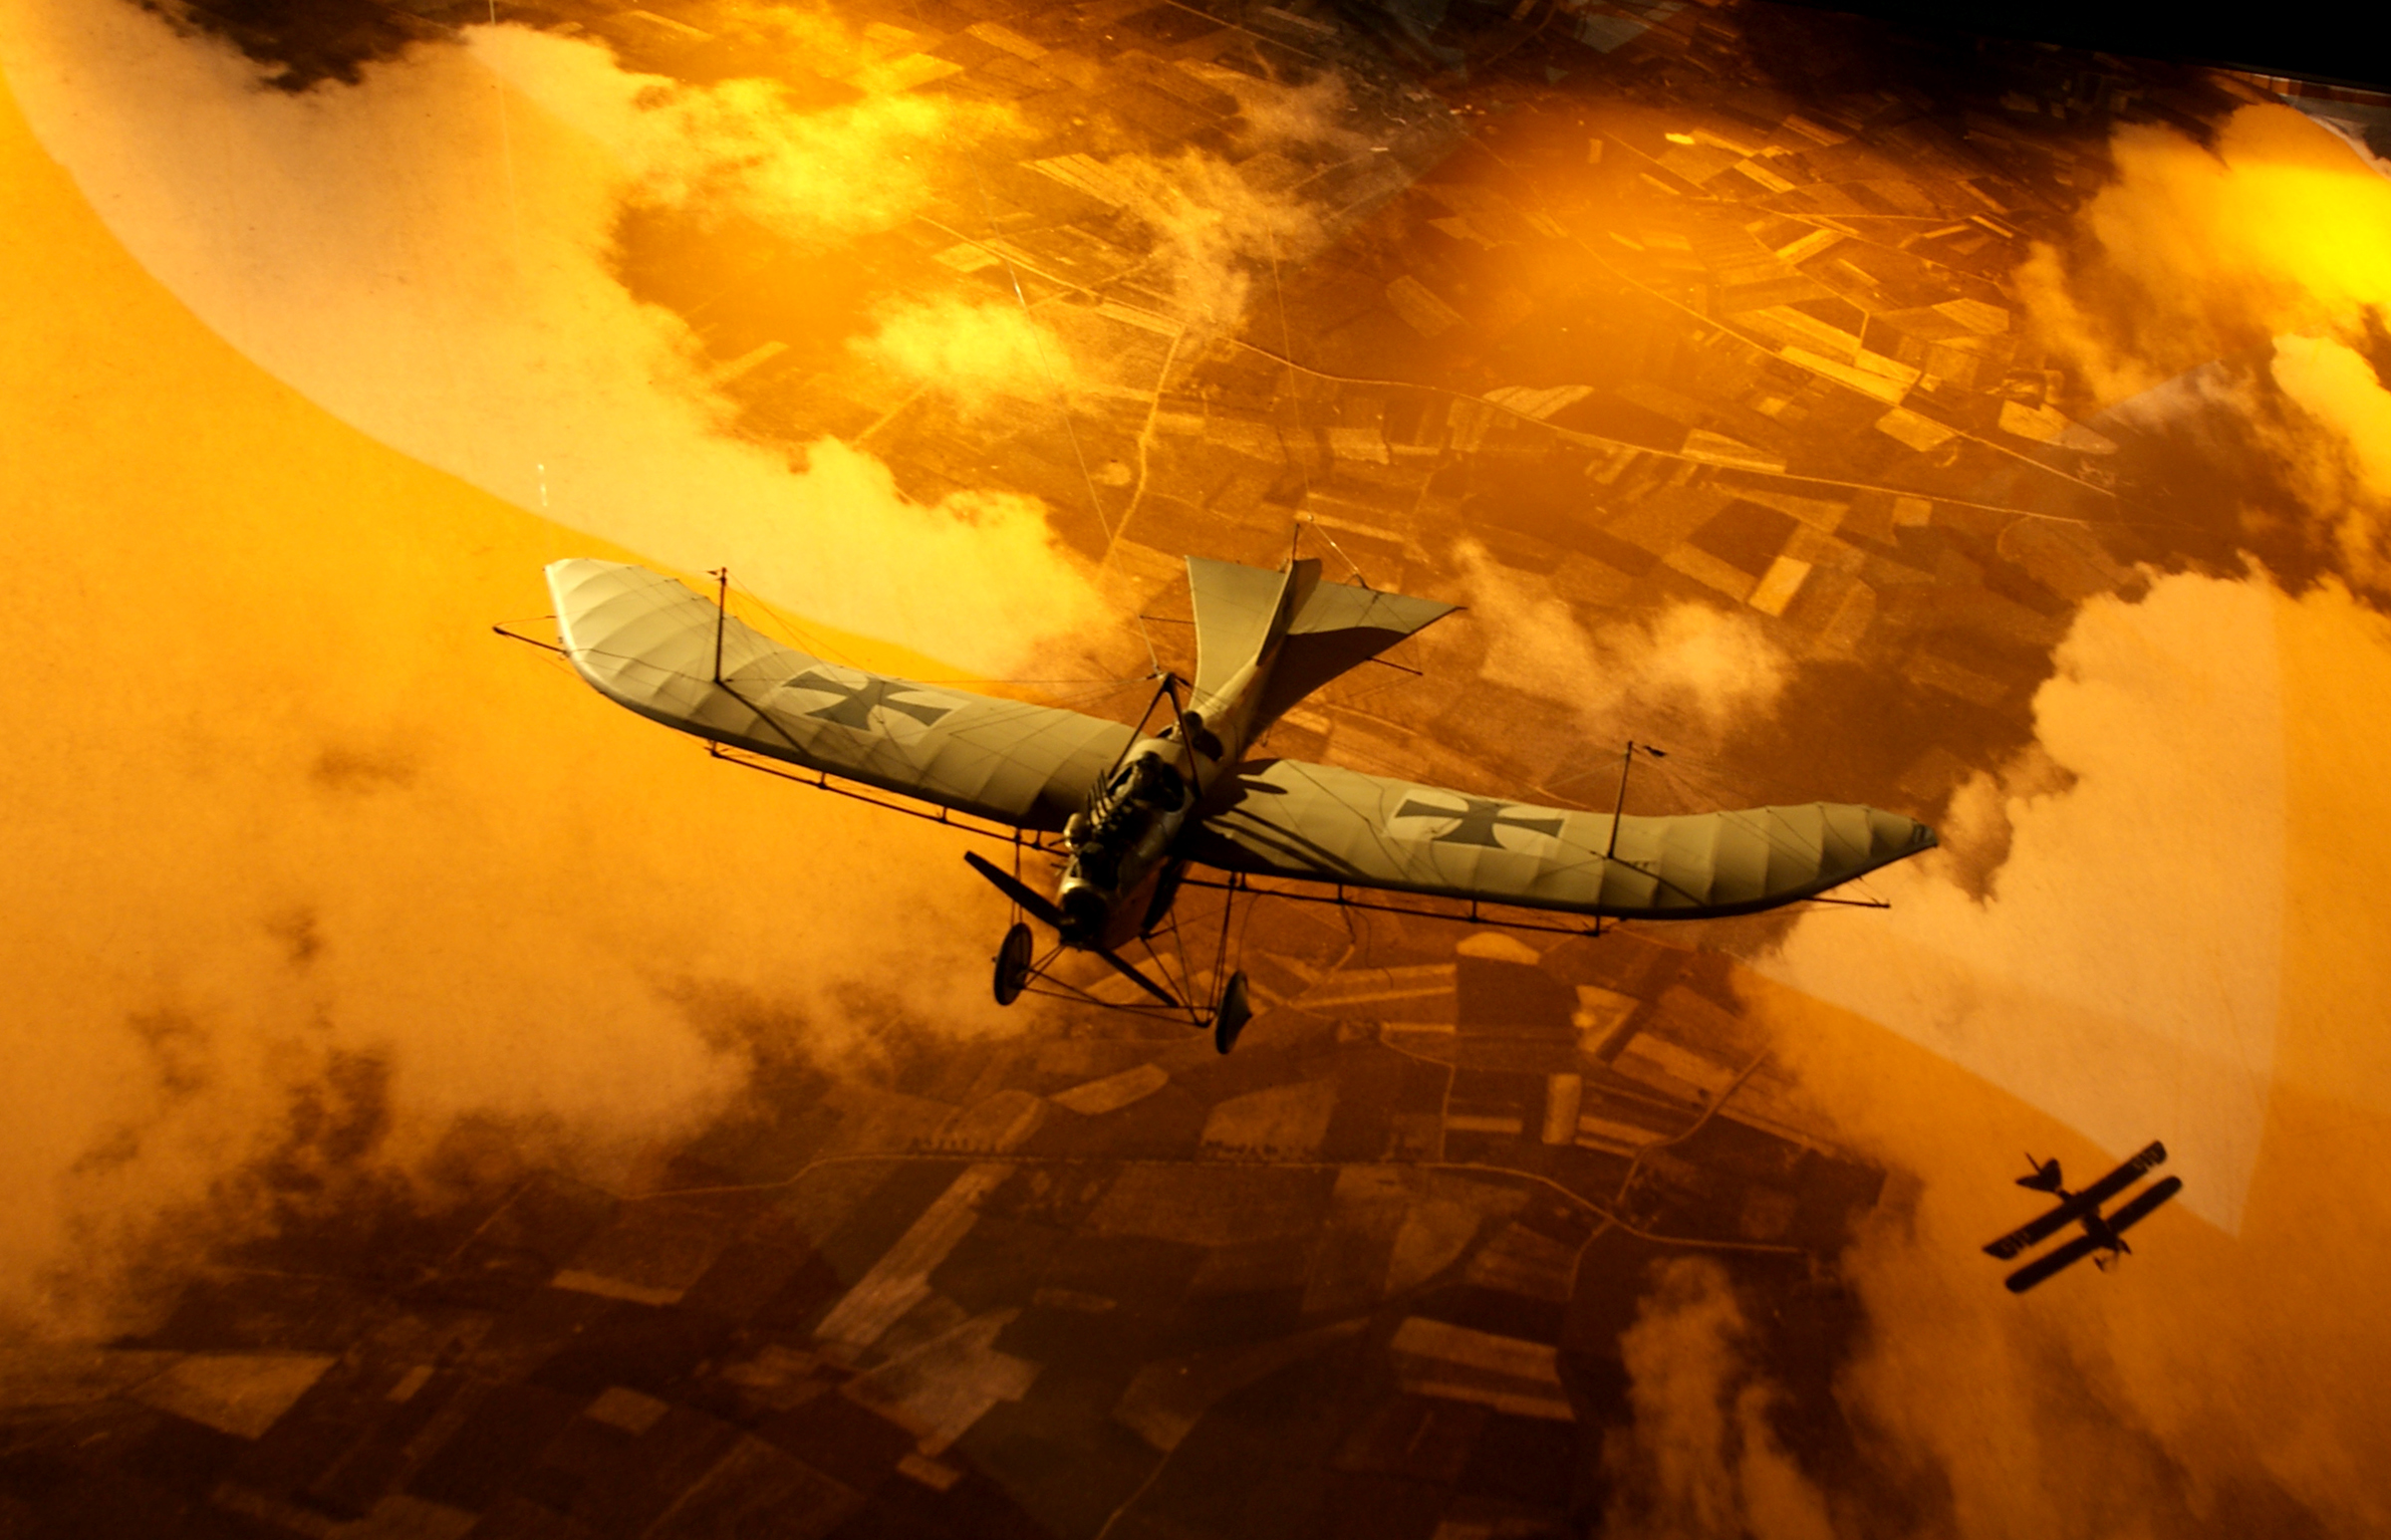 Free Image, wing, sunlight, morning, aircraft, reflection, vehicle, museum, outer space, newzealand, fighteraircraft, airshow, ww dogfight, aircraftww1omaka, etrichtaube, screenshot, macro photography, atmosphere of earth, computer wallpaper